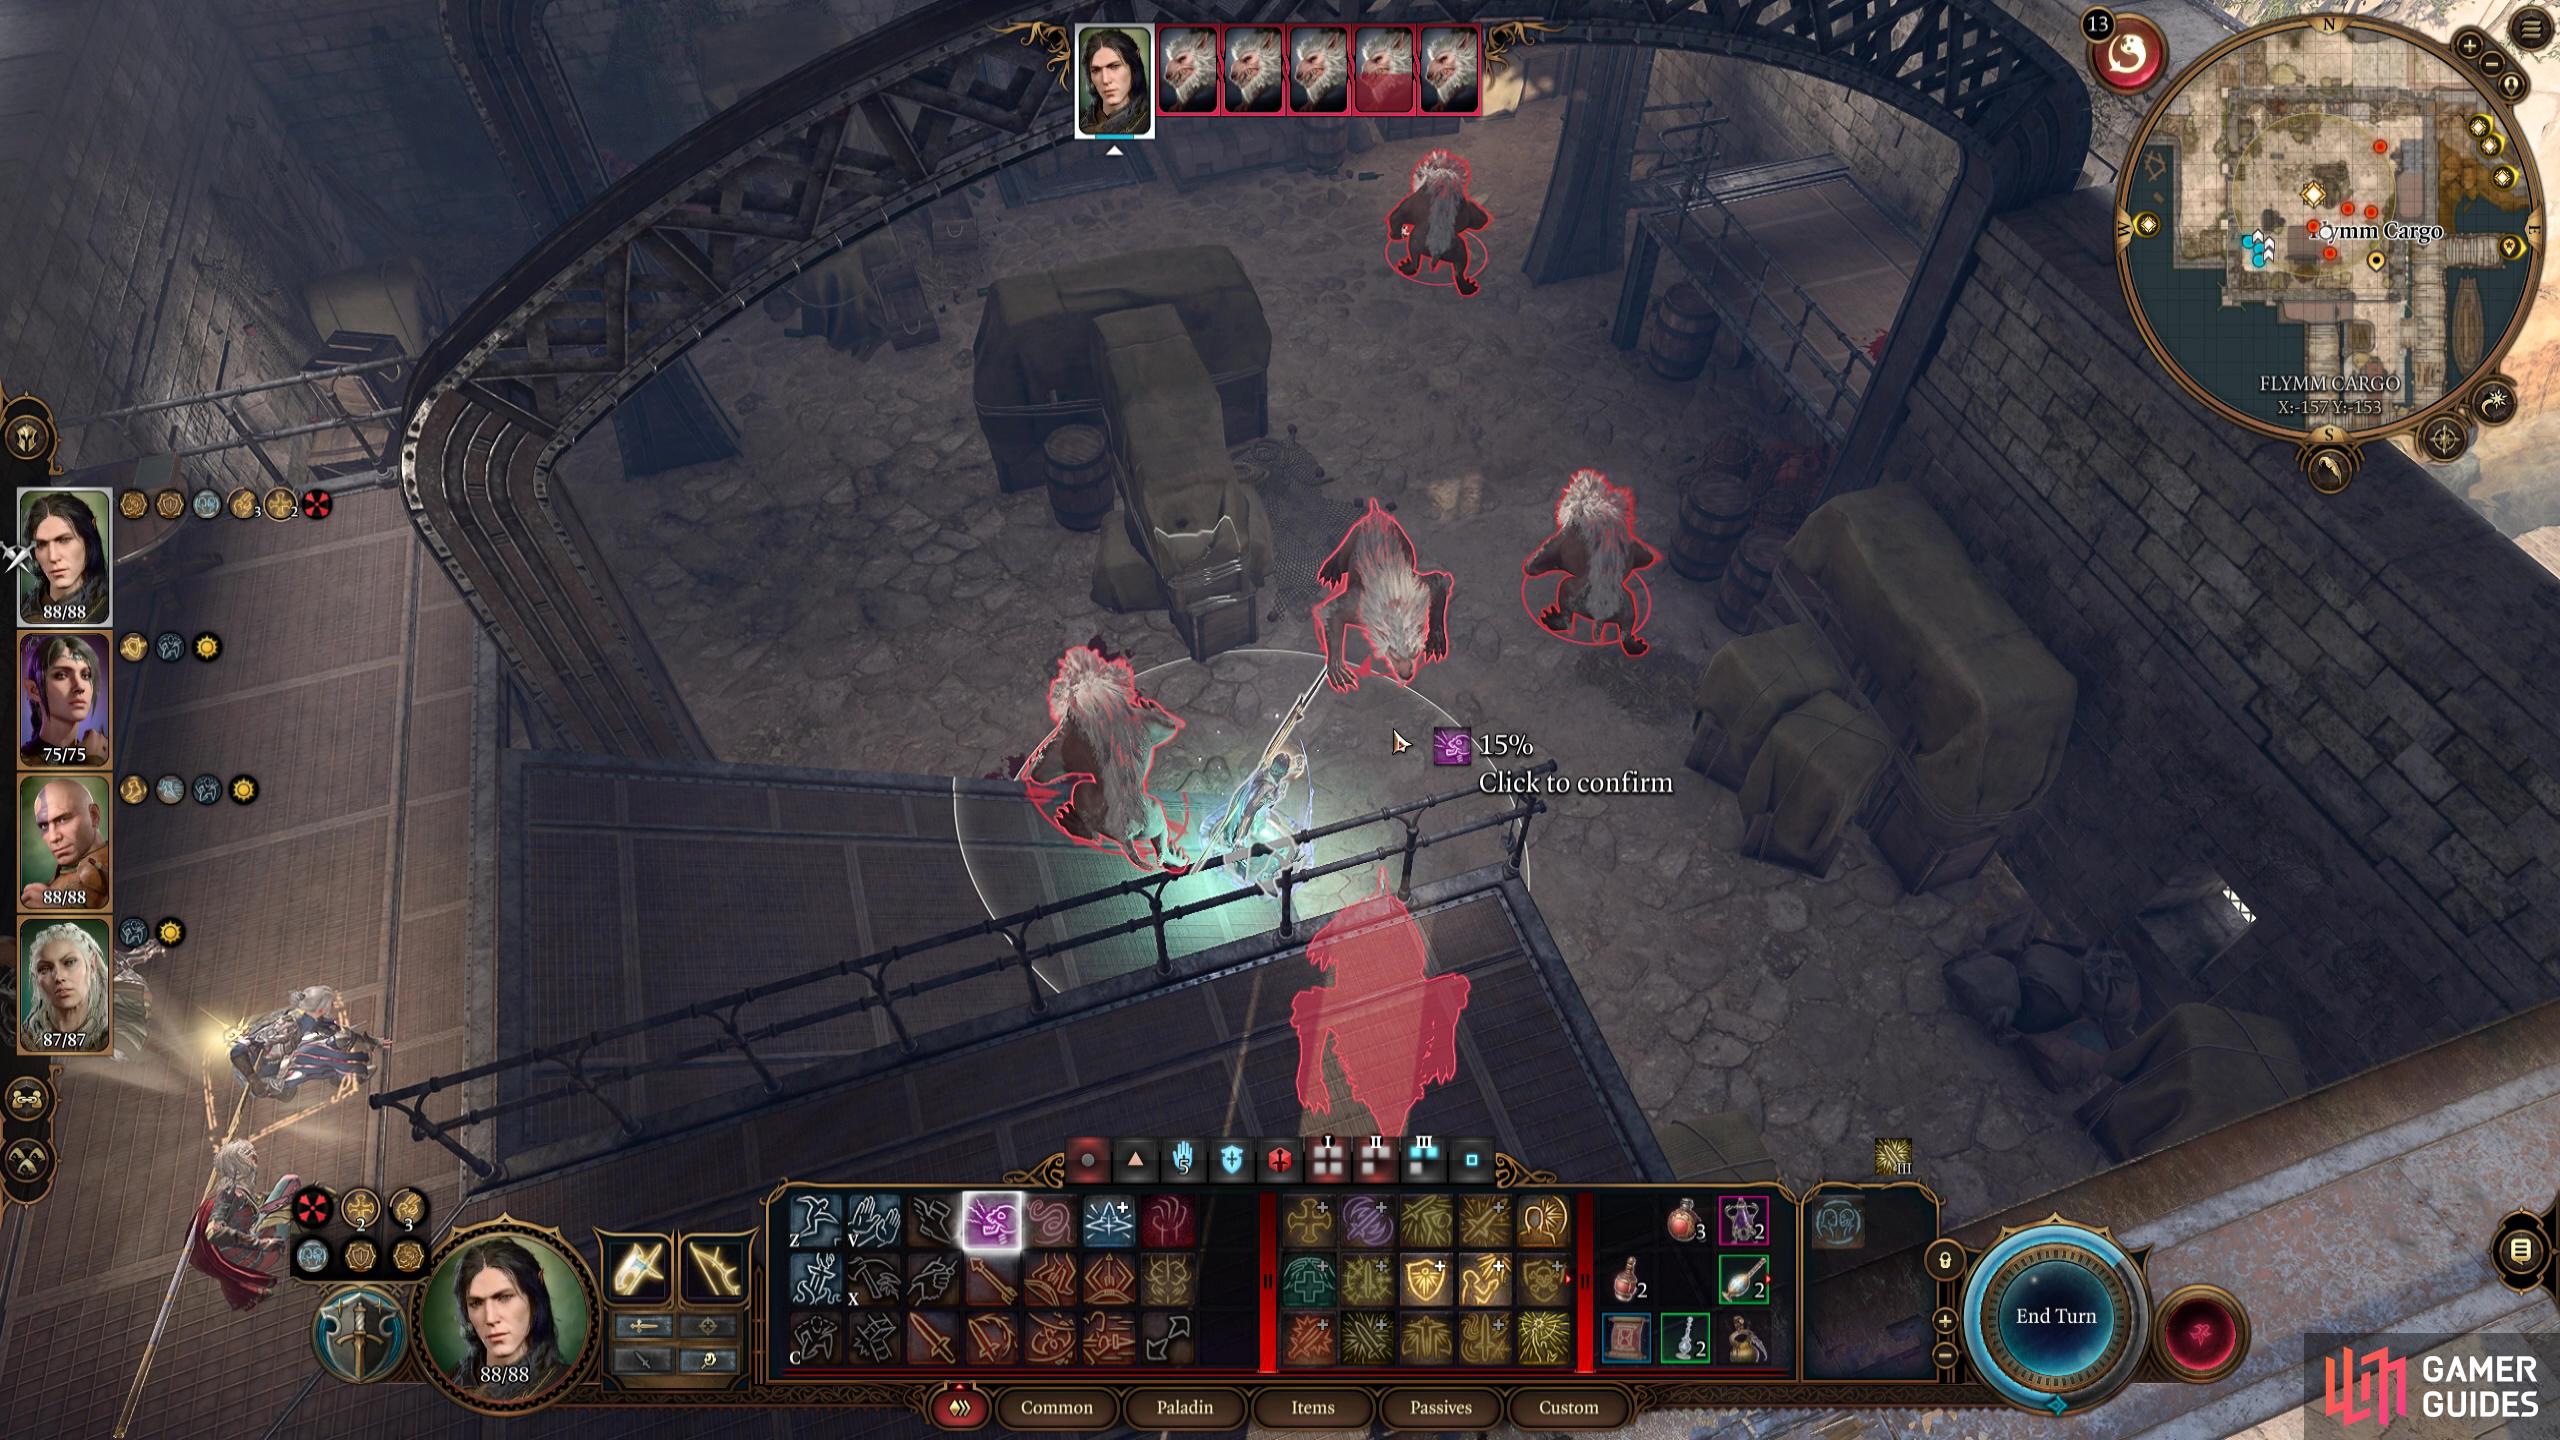 How To Complete Avenge the Drowned in Baldur's Gate 3